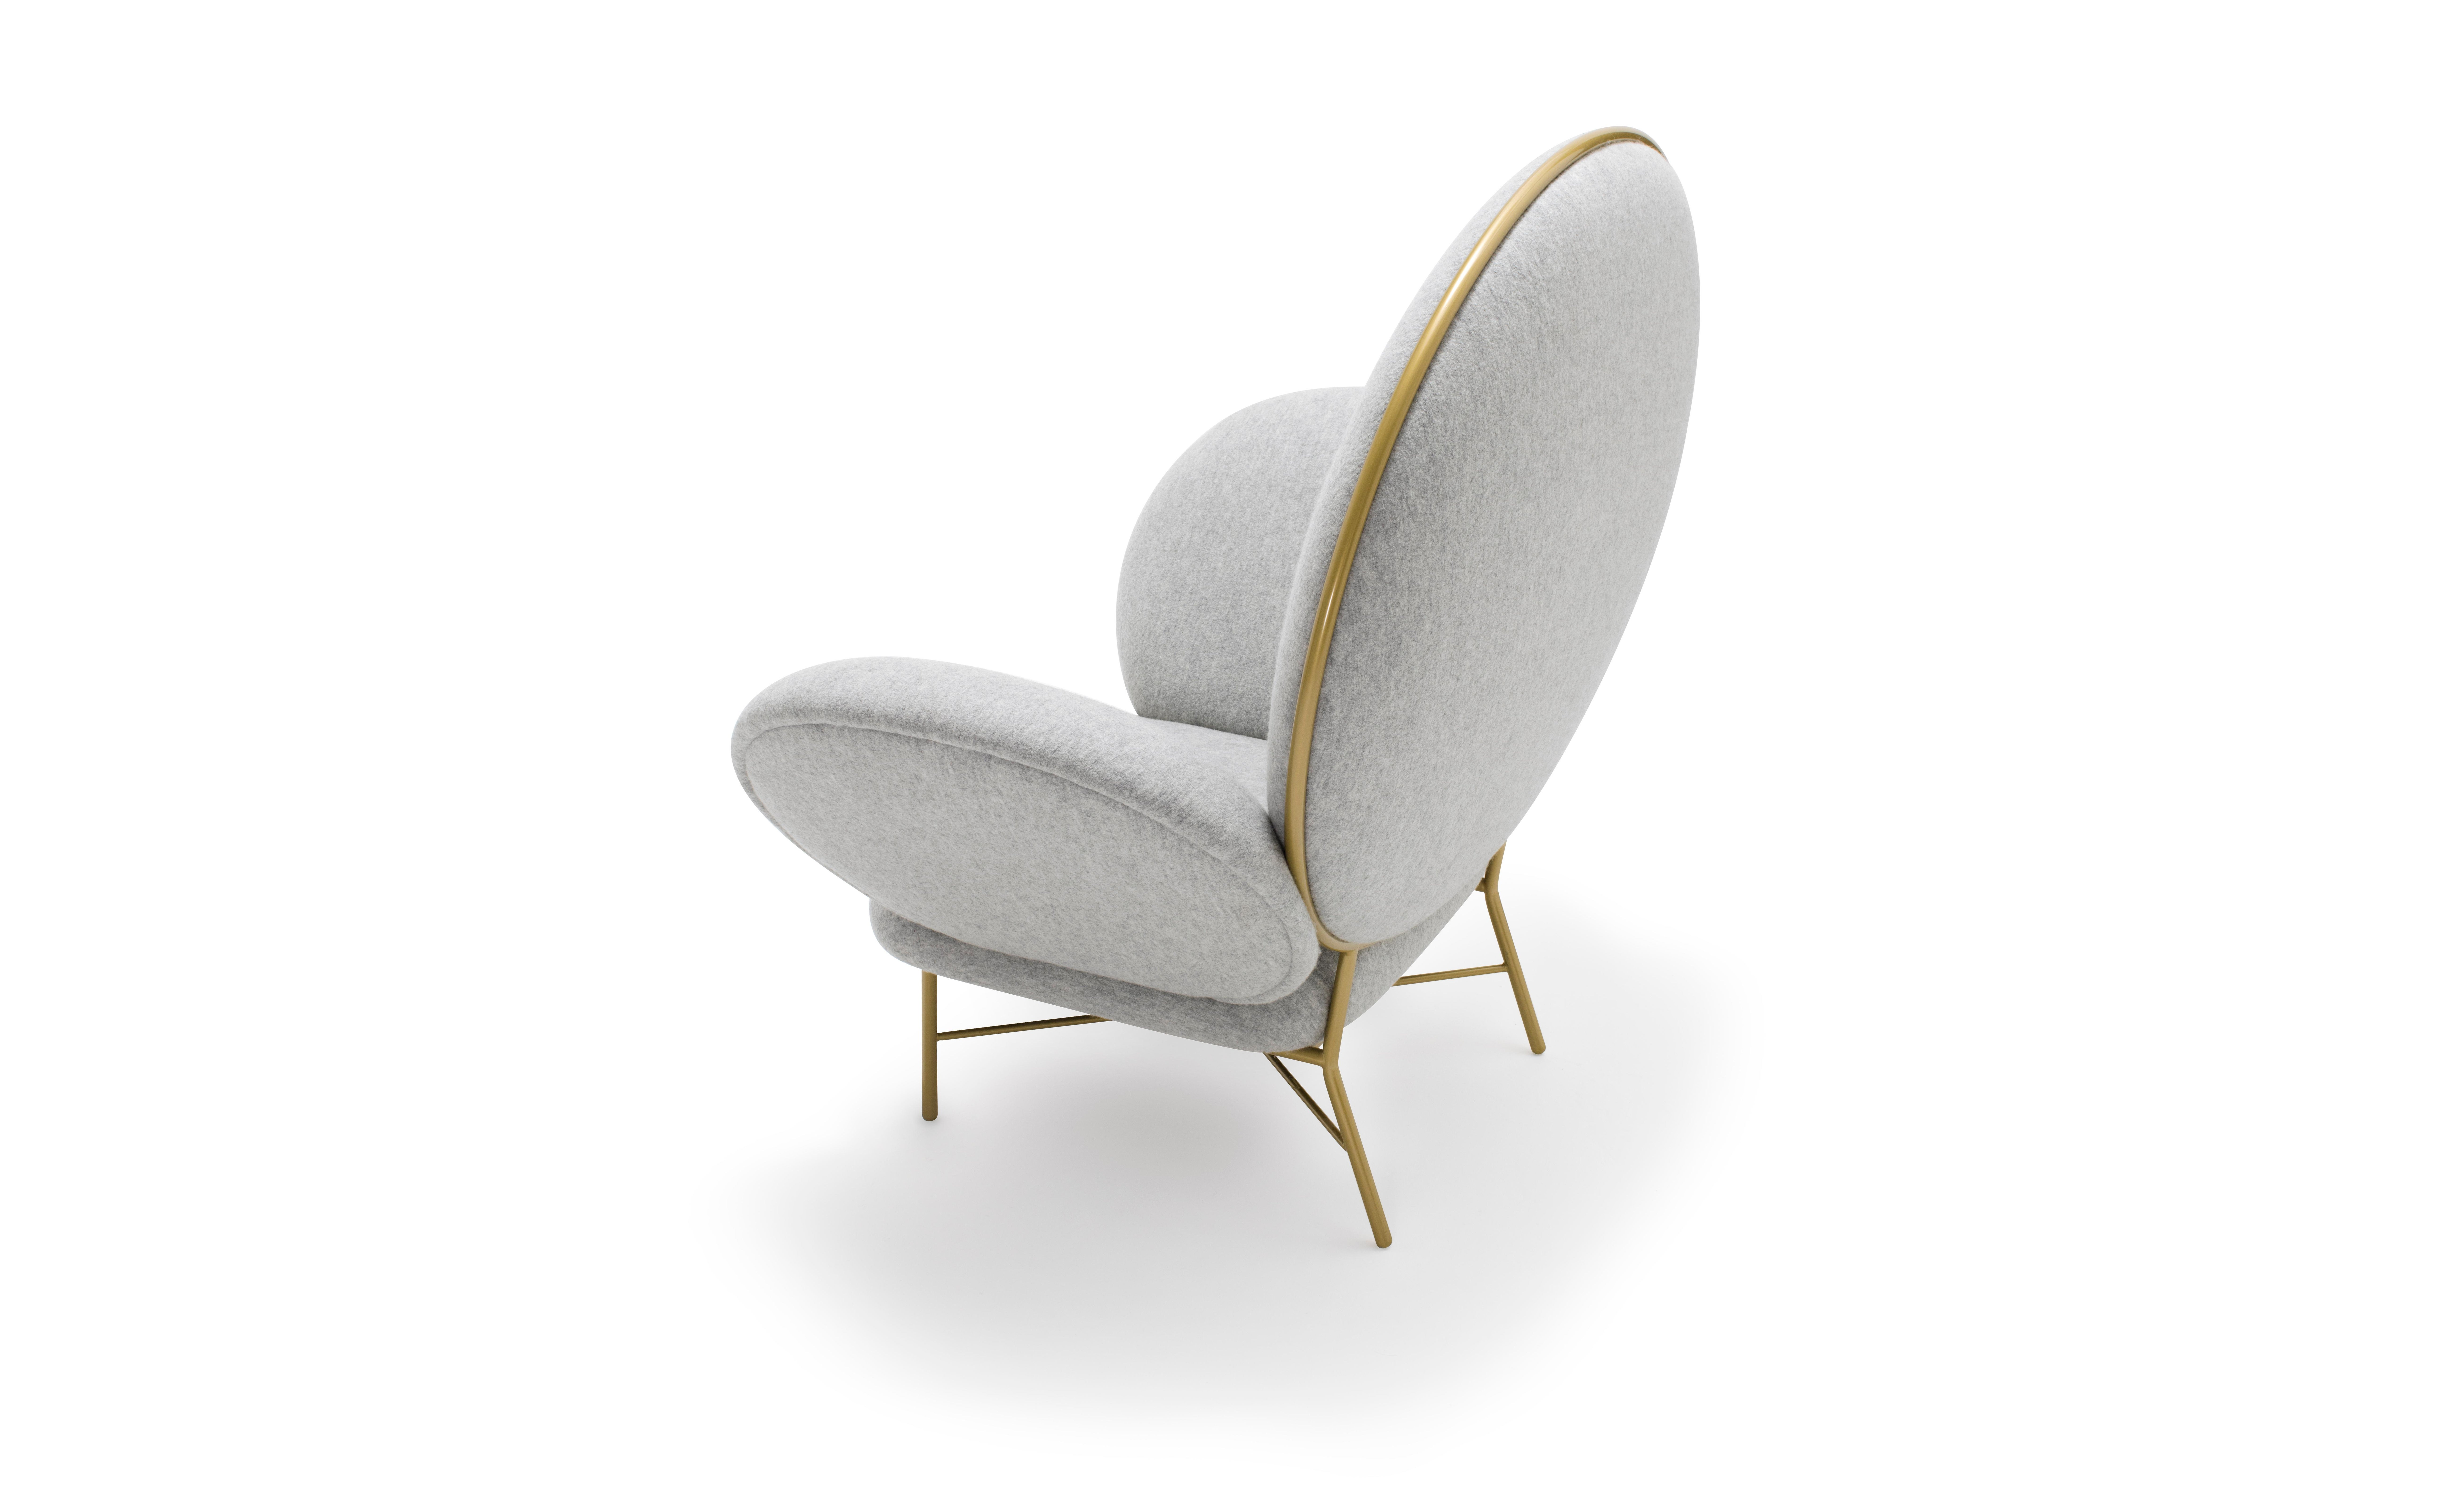 Modern Contemporary Grey Upholstered Armchair, Stay Armchair by Nika Zupanc for Se